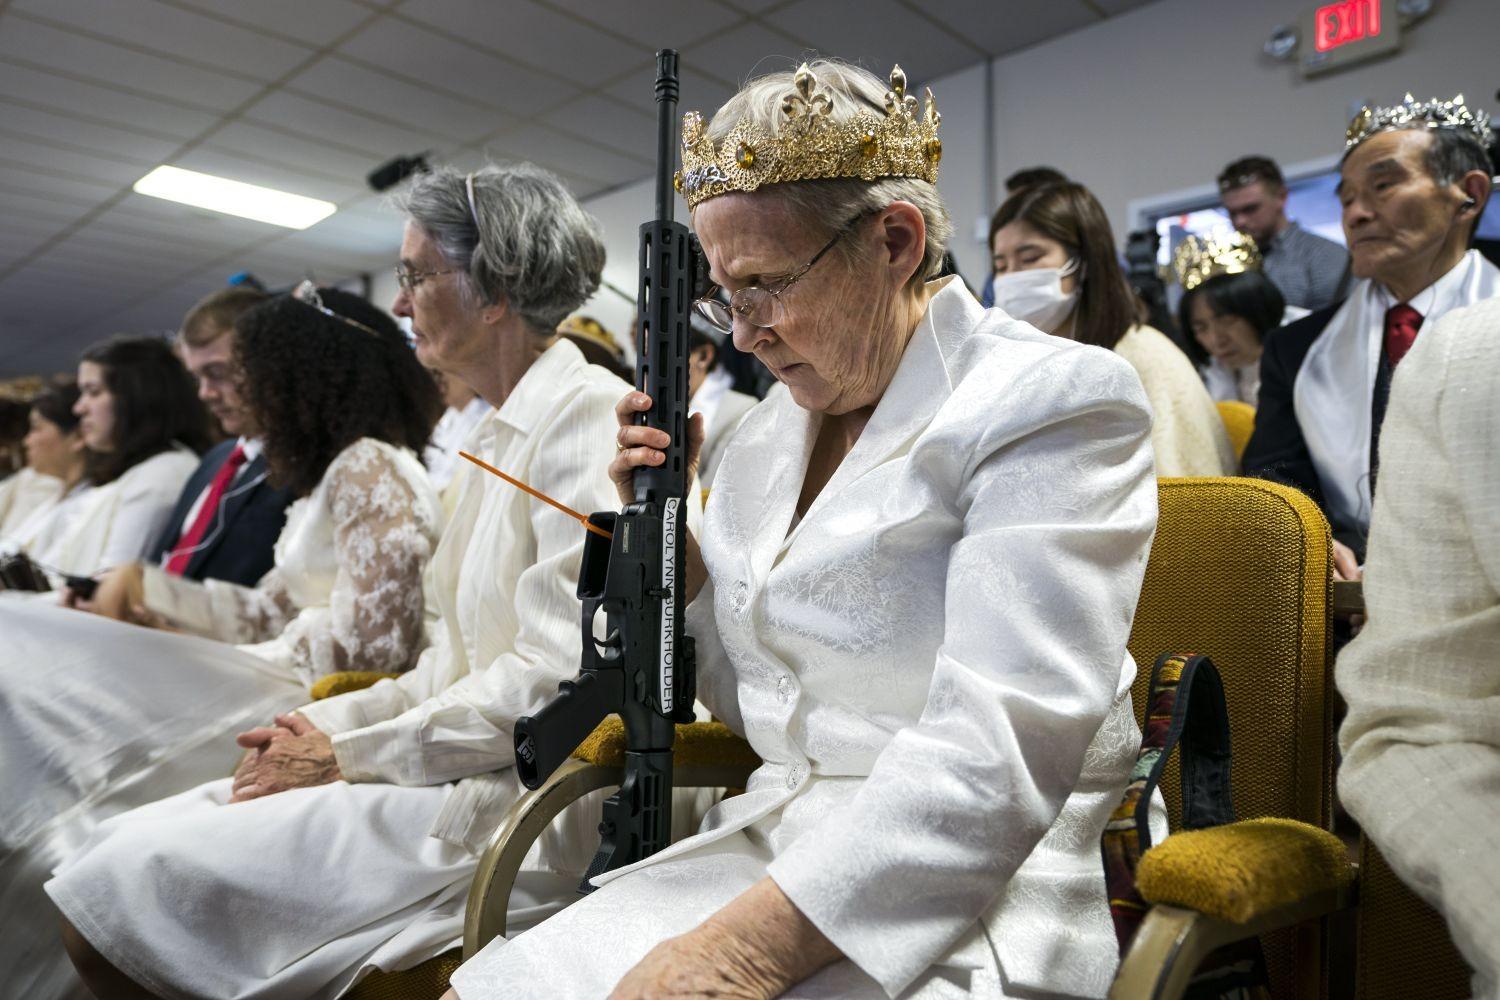 A parishioner with the Sanctuary Church holds onto her AR-15